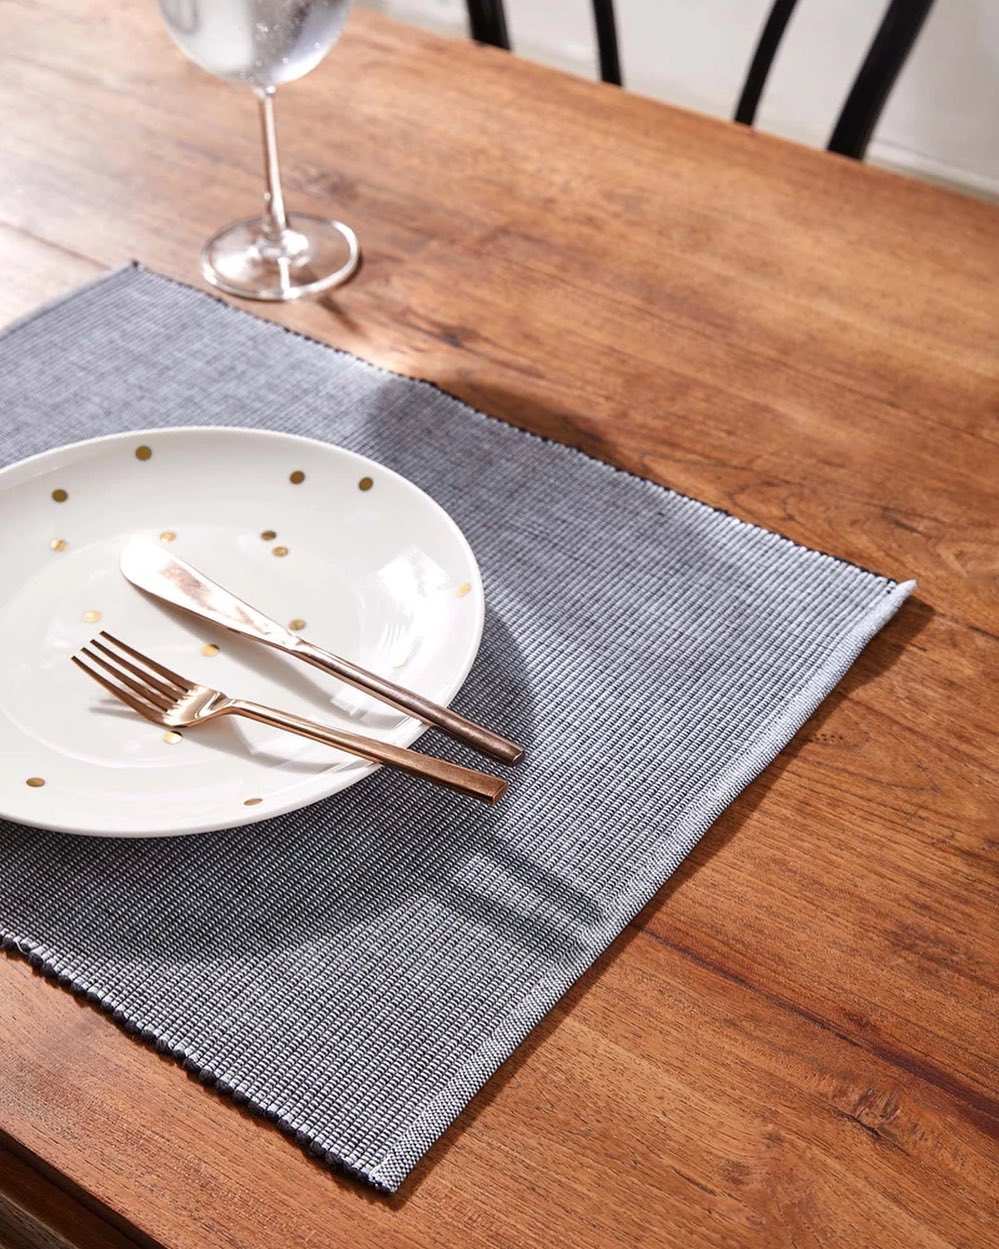 The Label Life - Our post-work evening ritual includes a laughter-filled dinner with the family.

Link in bio to shop equally happy serveware.

#TheLabelLife #Home #HomeAccessories #Placemat #Dinner